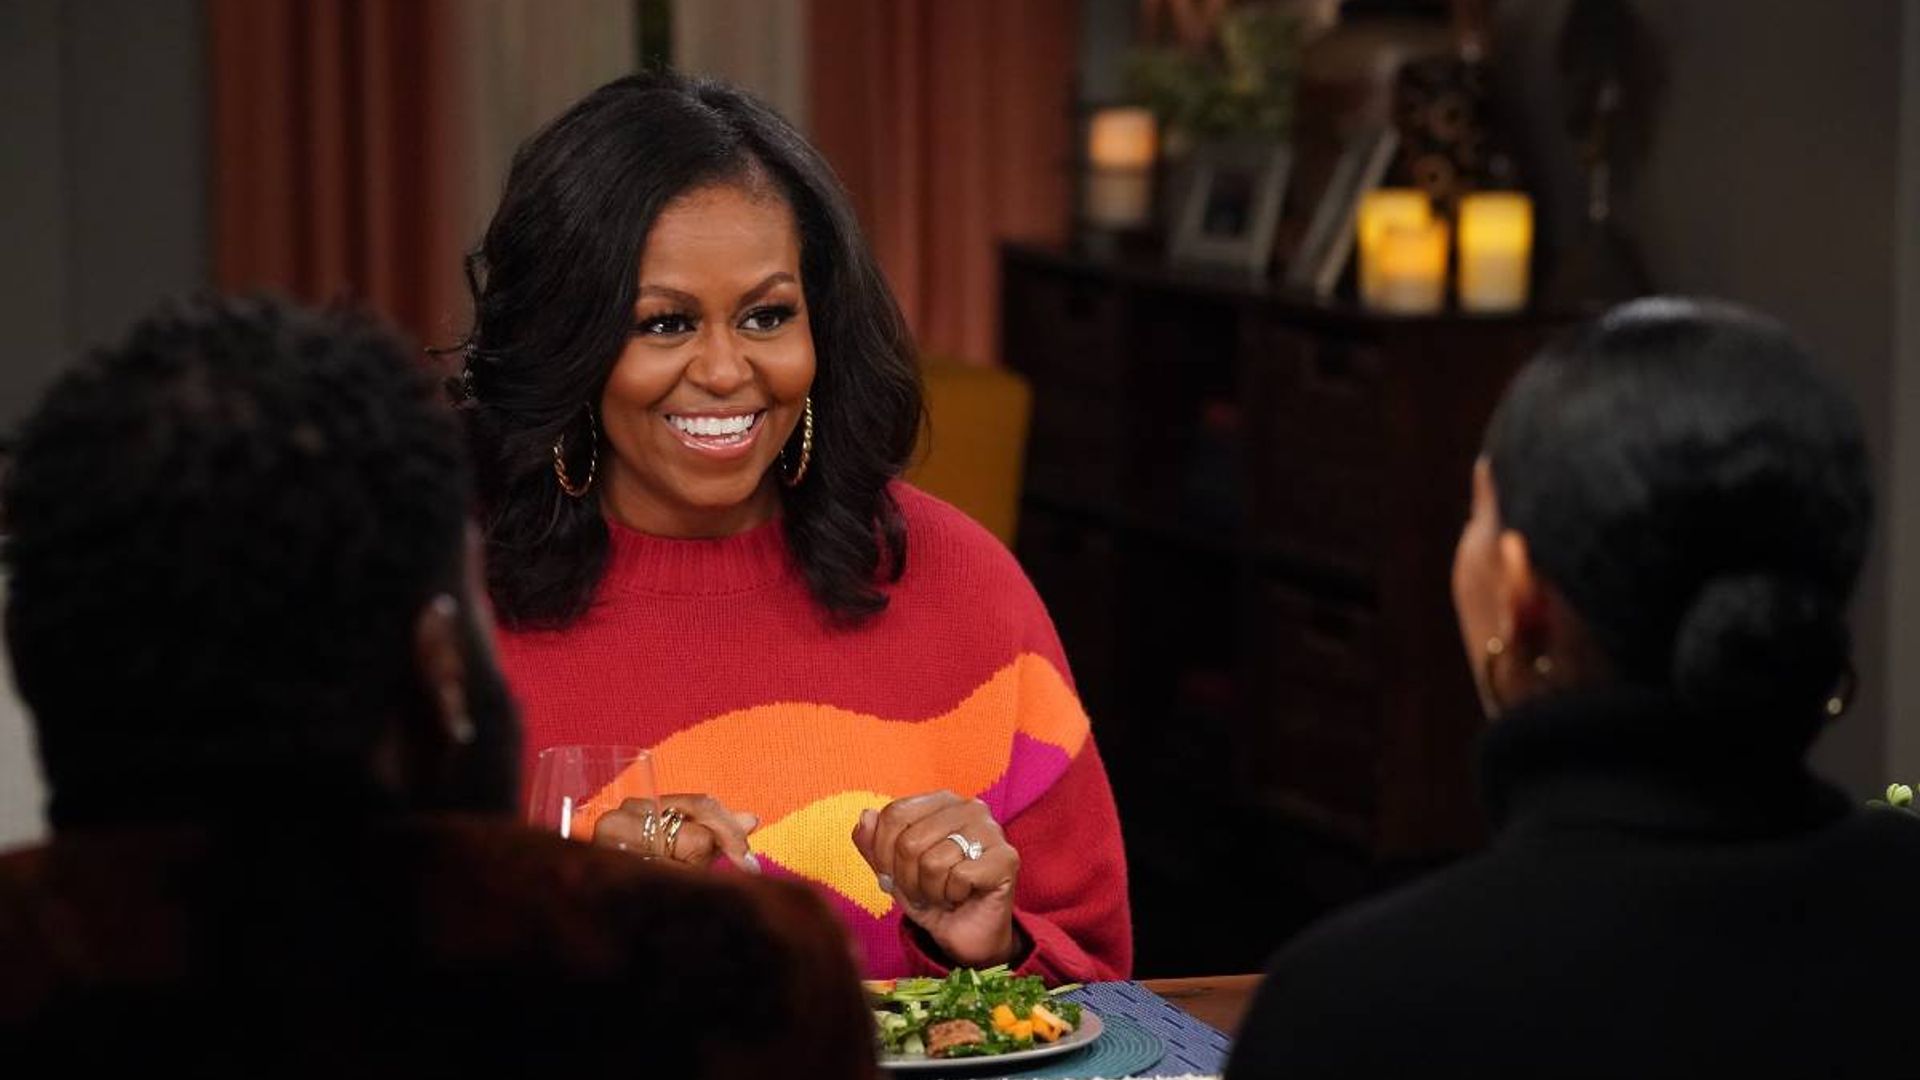 Michelle Obama gives fans a rare glimpse of birthday celebrations